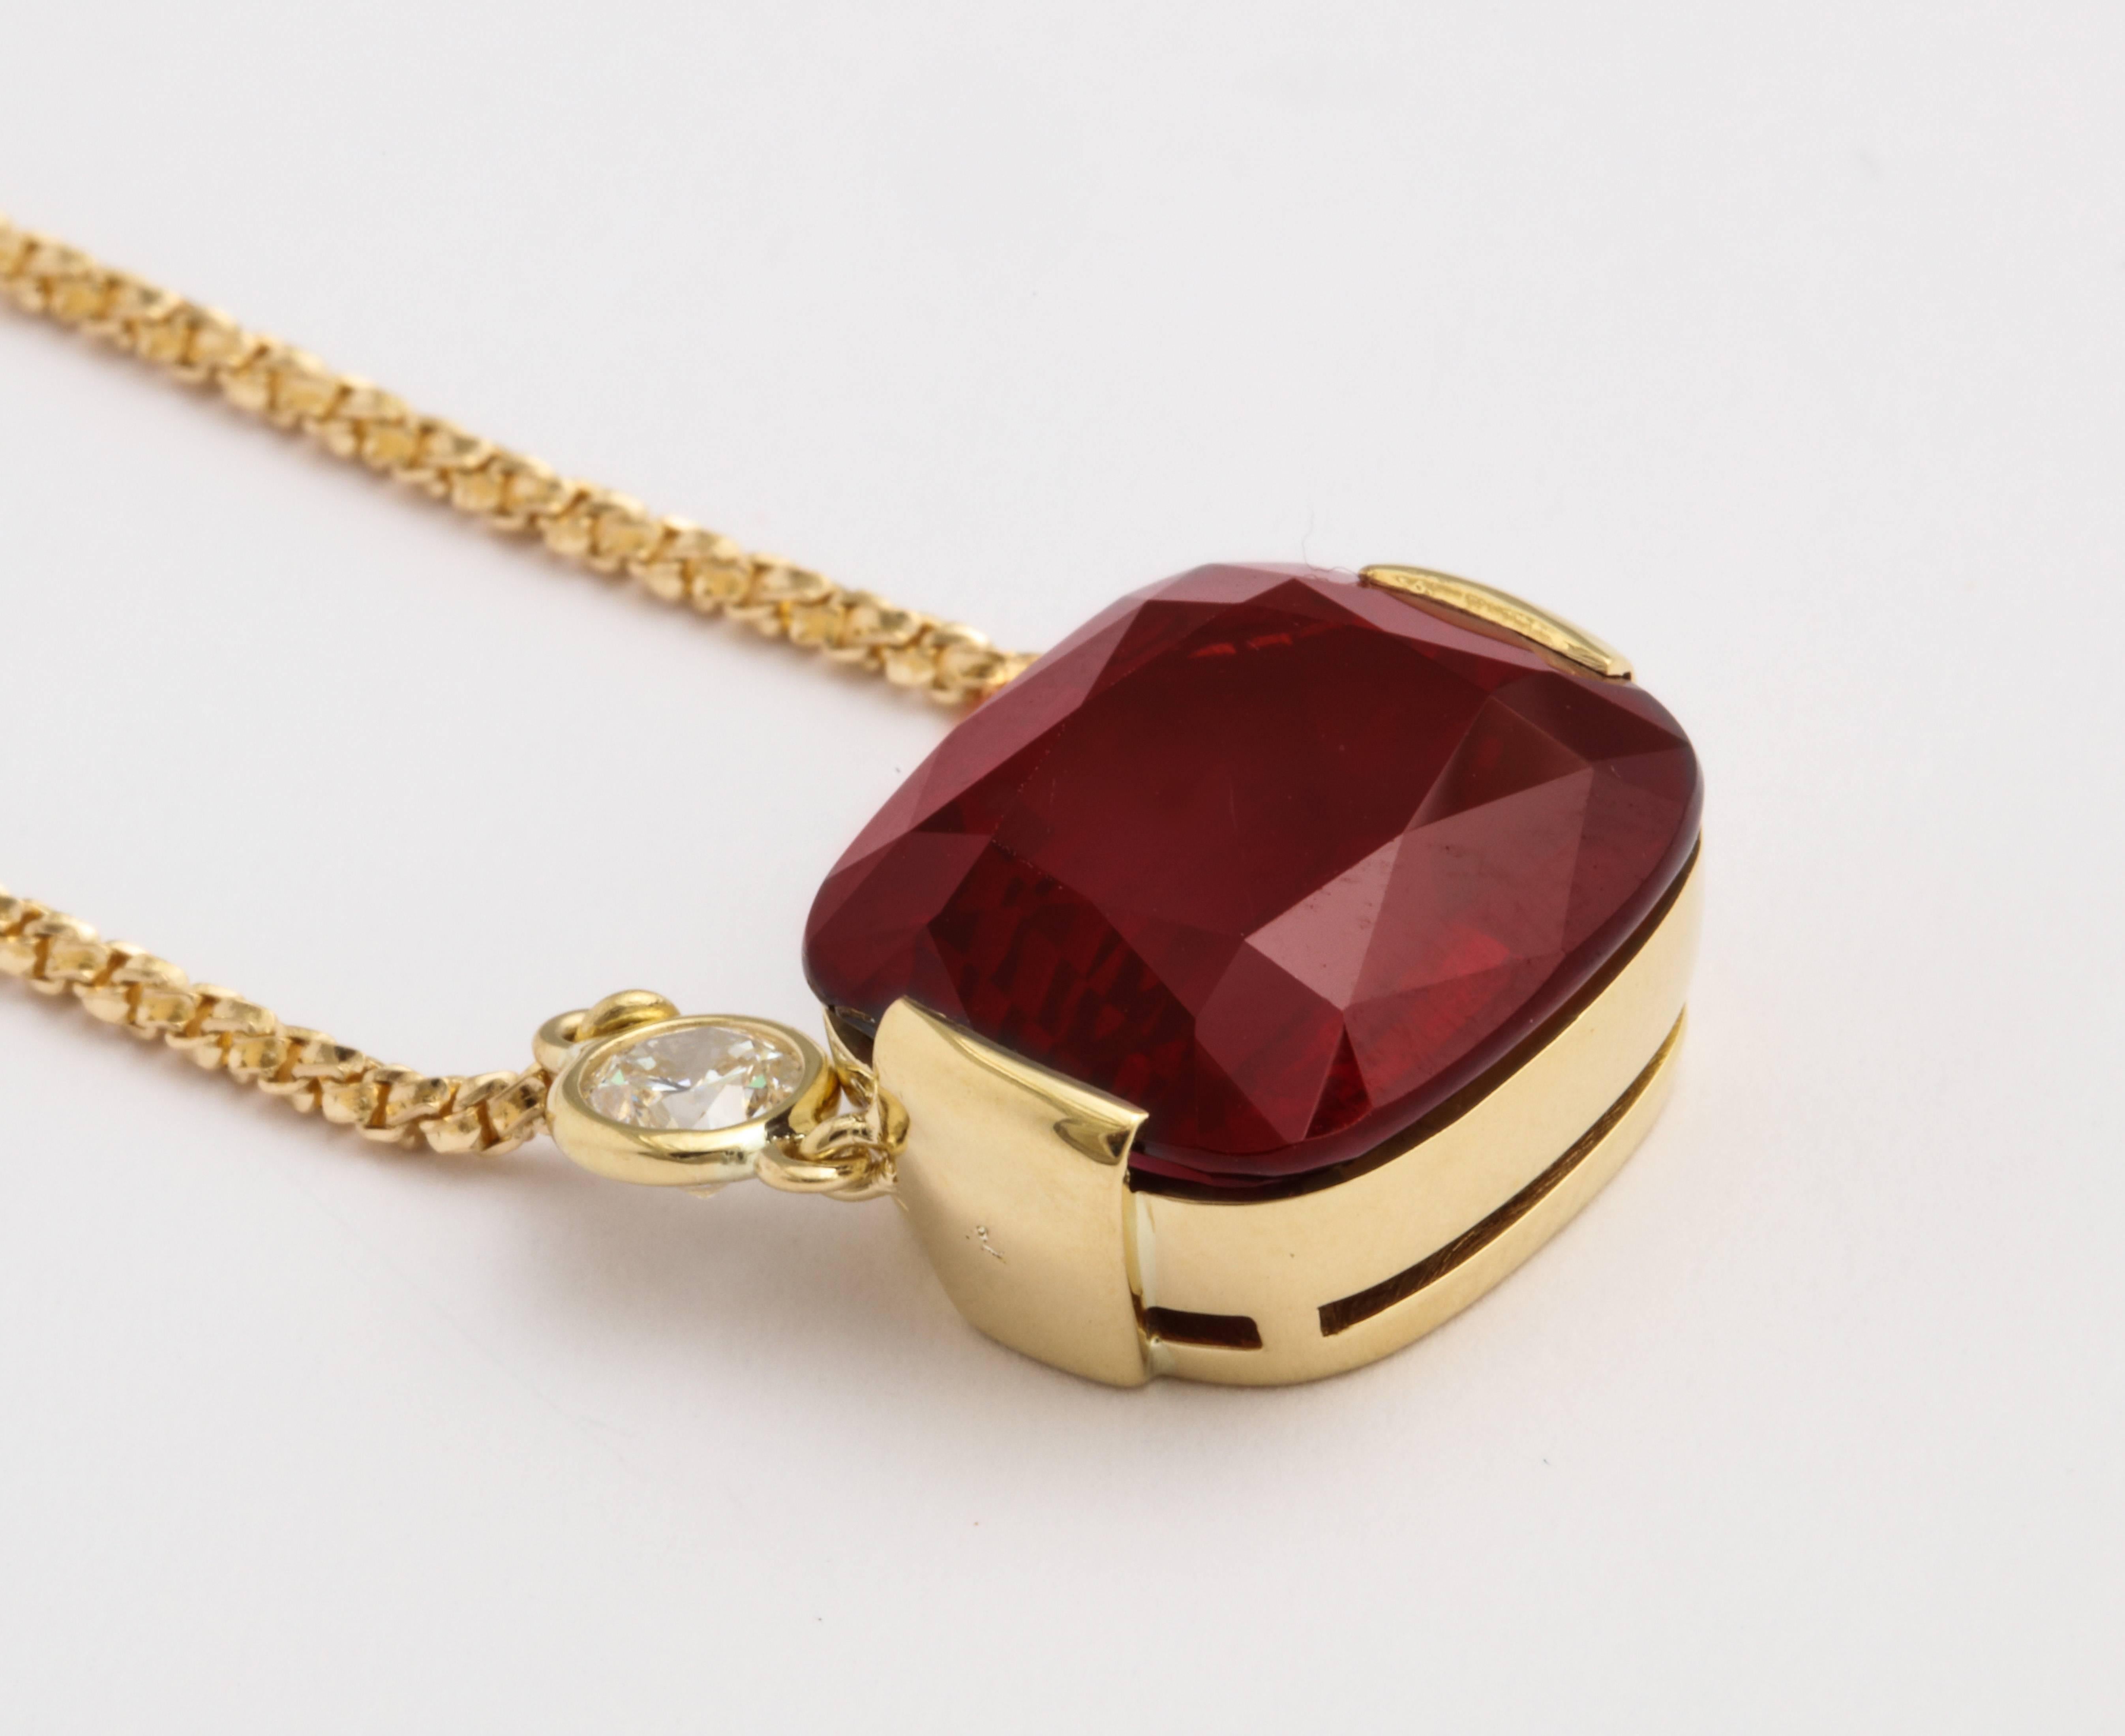 An 18 karat yellow gold box chain necklace featuring a cushion cut 16.65 carat rhodolite garnet. The round brilliant cut diamonds on either side weigh 0.83 carats total. Adjustable length - 20" or 16."

Signed Donna Vock Designs.
